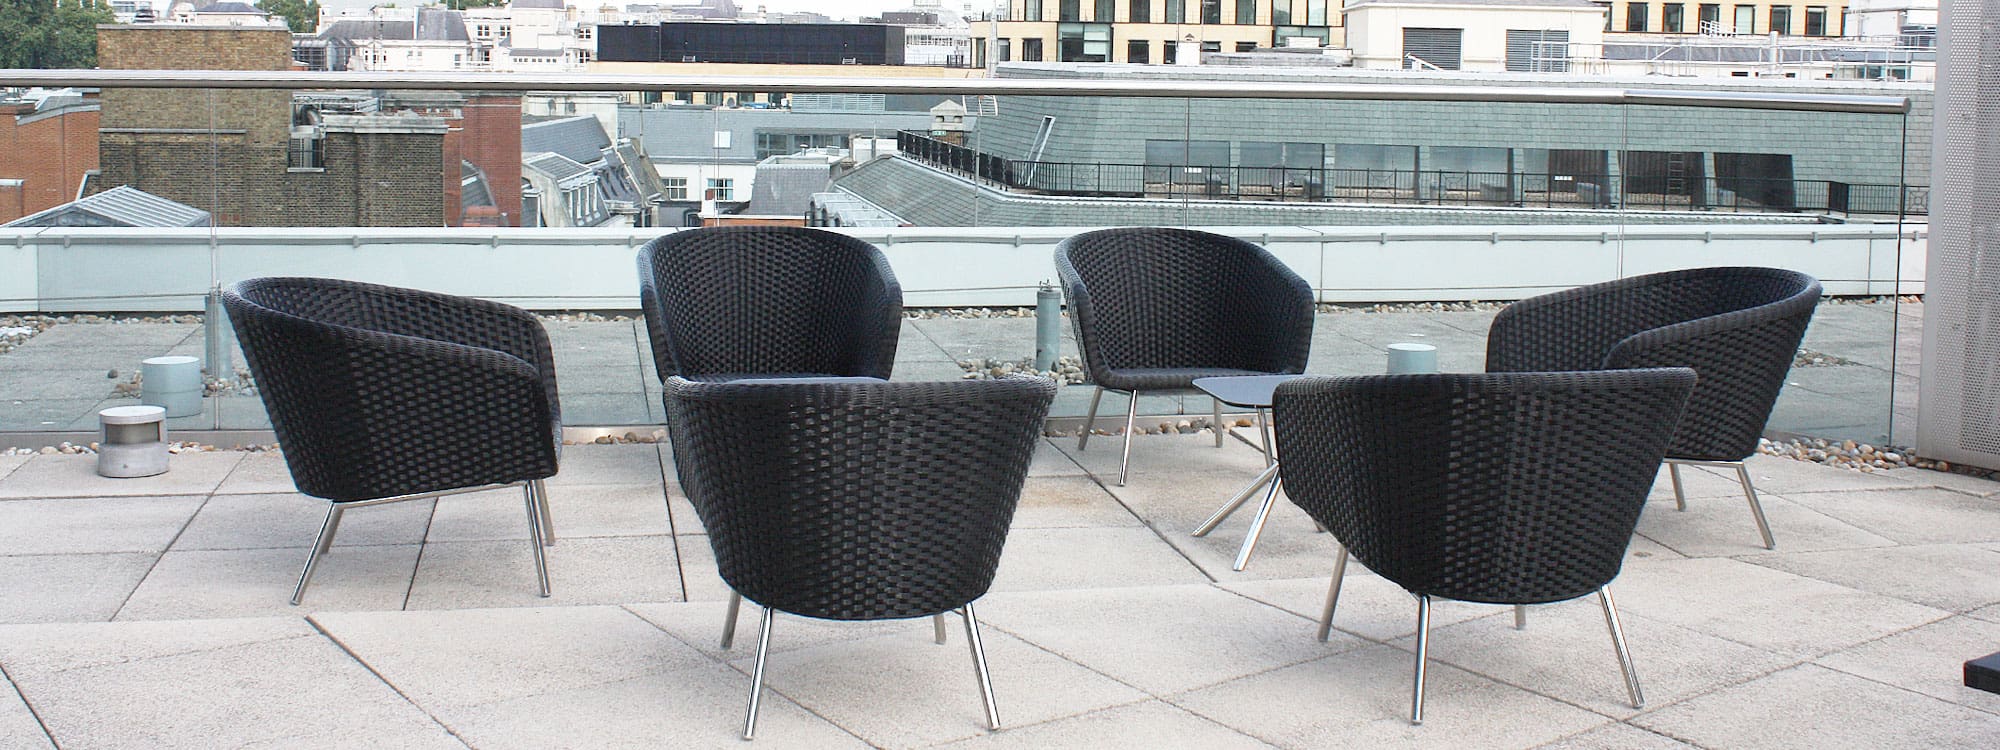 Image of FueraDentro Shell exterior lounge furniture on City of London office rooftop terrace